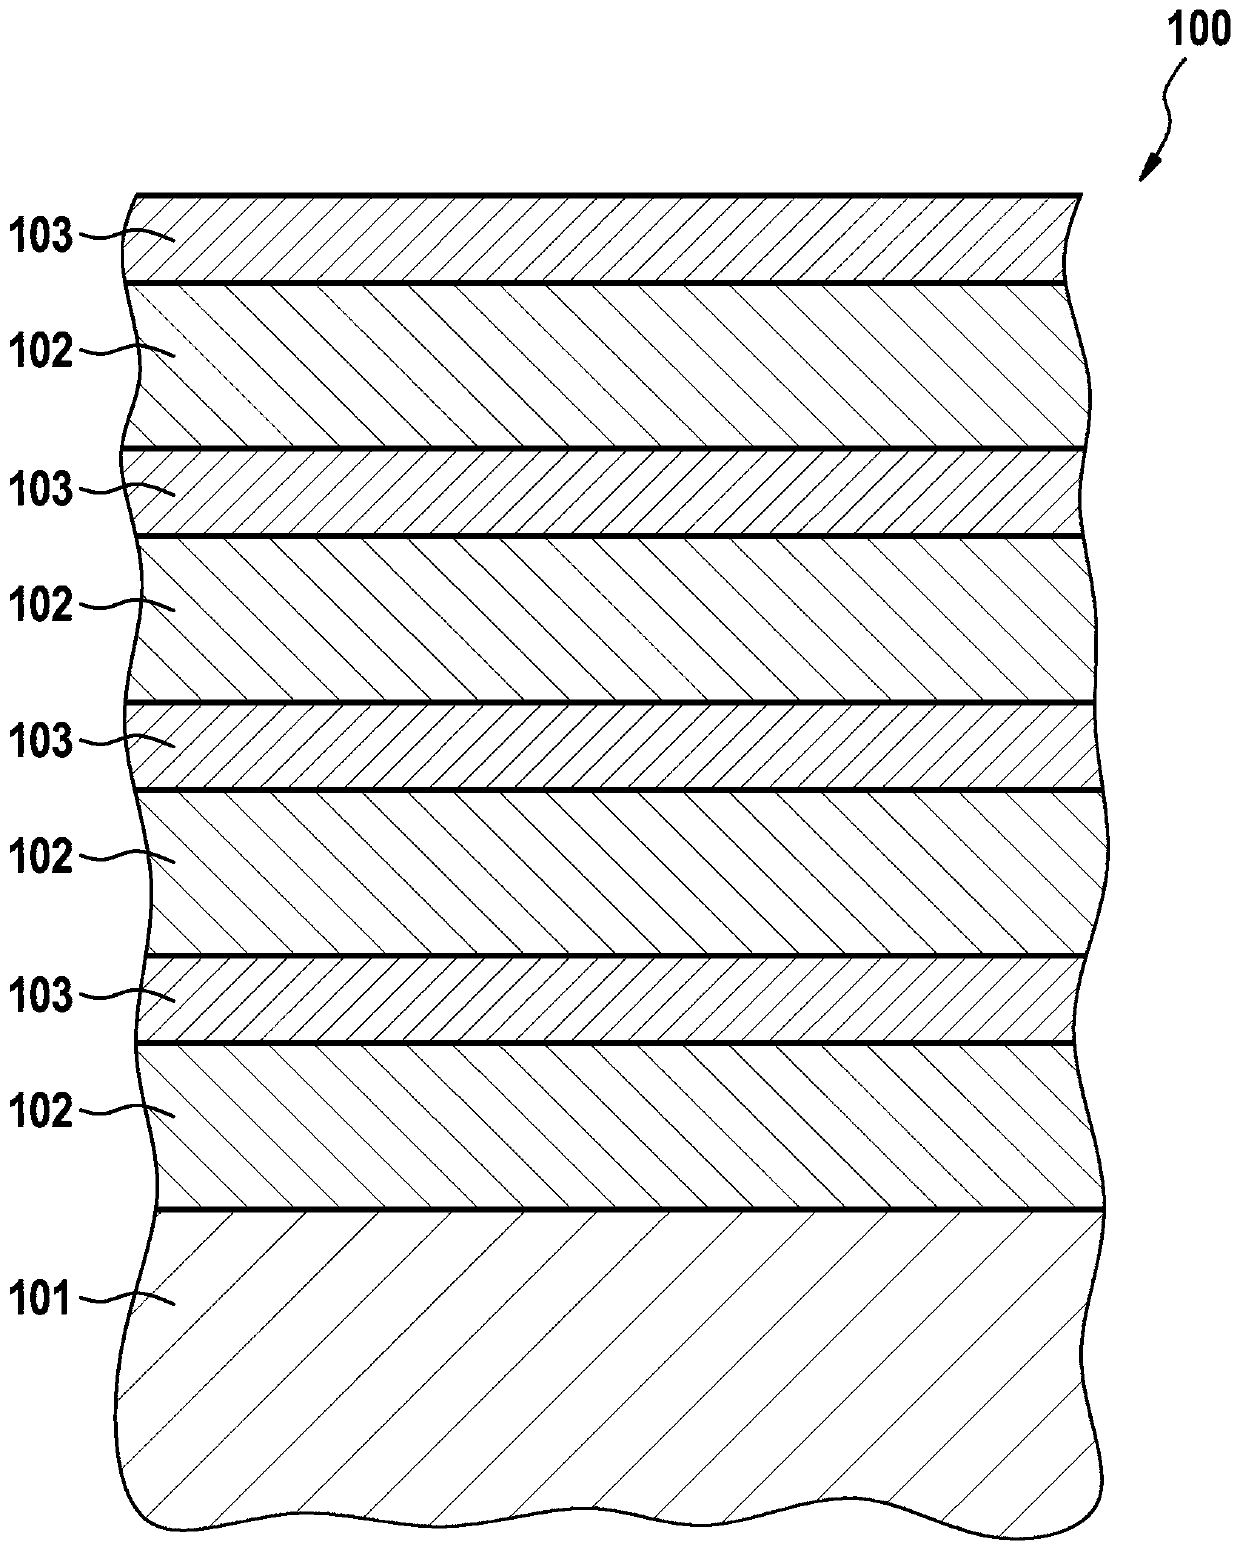 Method for producing a gas-sensitive nanocrystalline layer structure, corresponding gas-sensitive nanocrystalline layer structure, and gas sensor with a corresponding gas-sensitive nanocrystalline layer structure